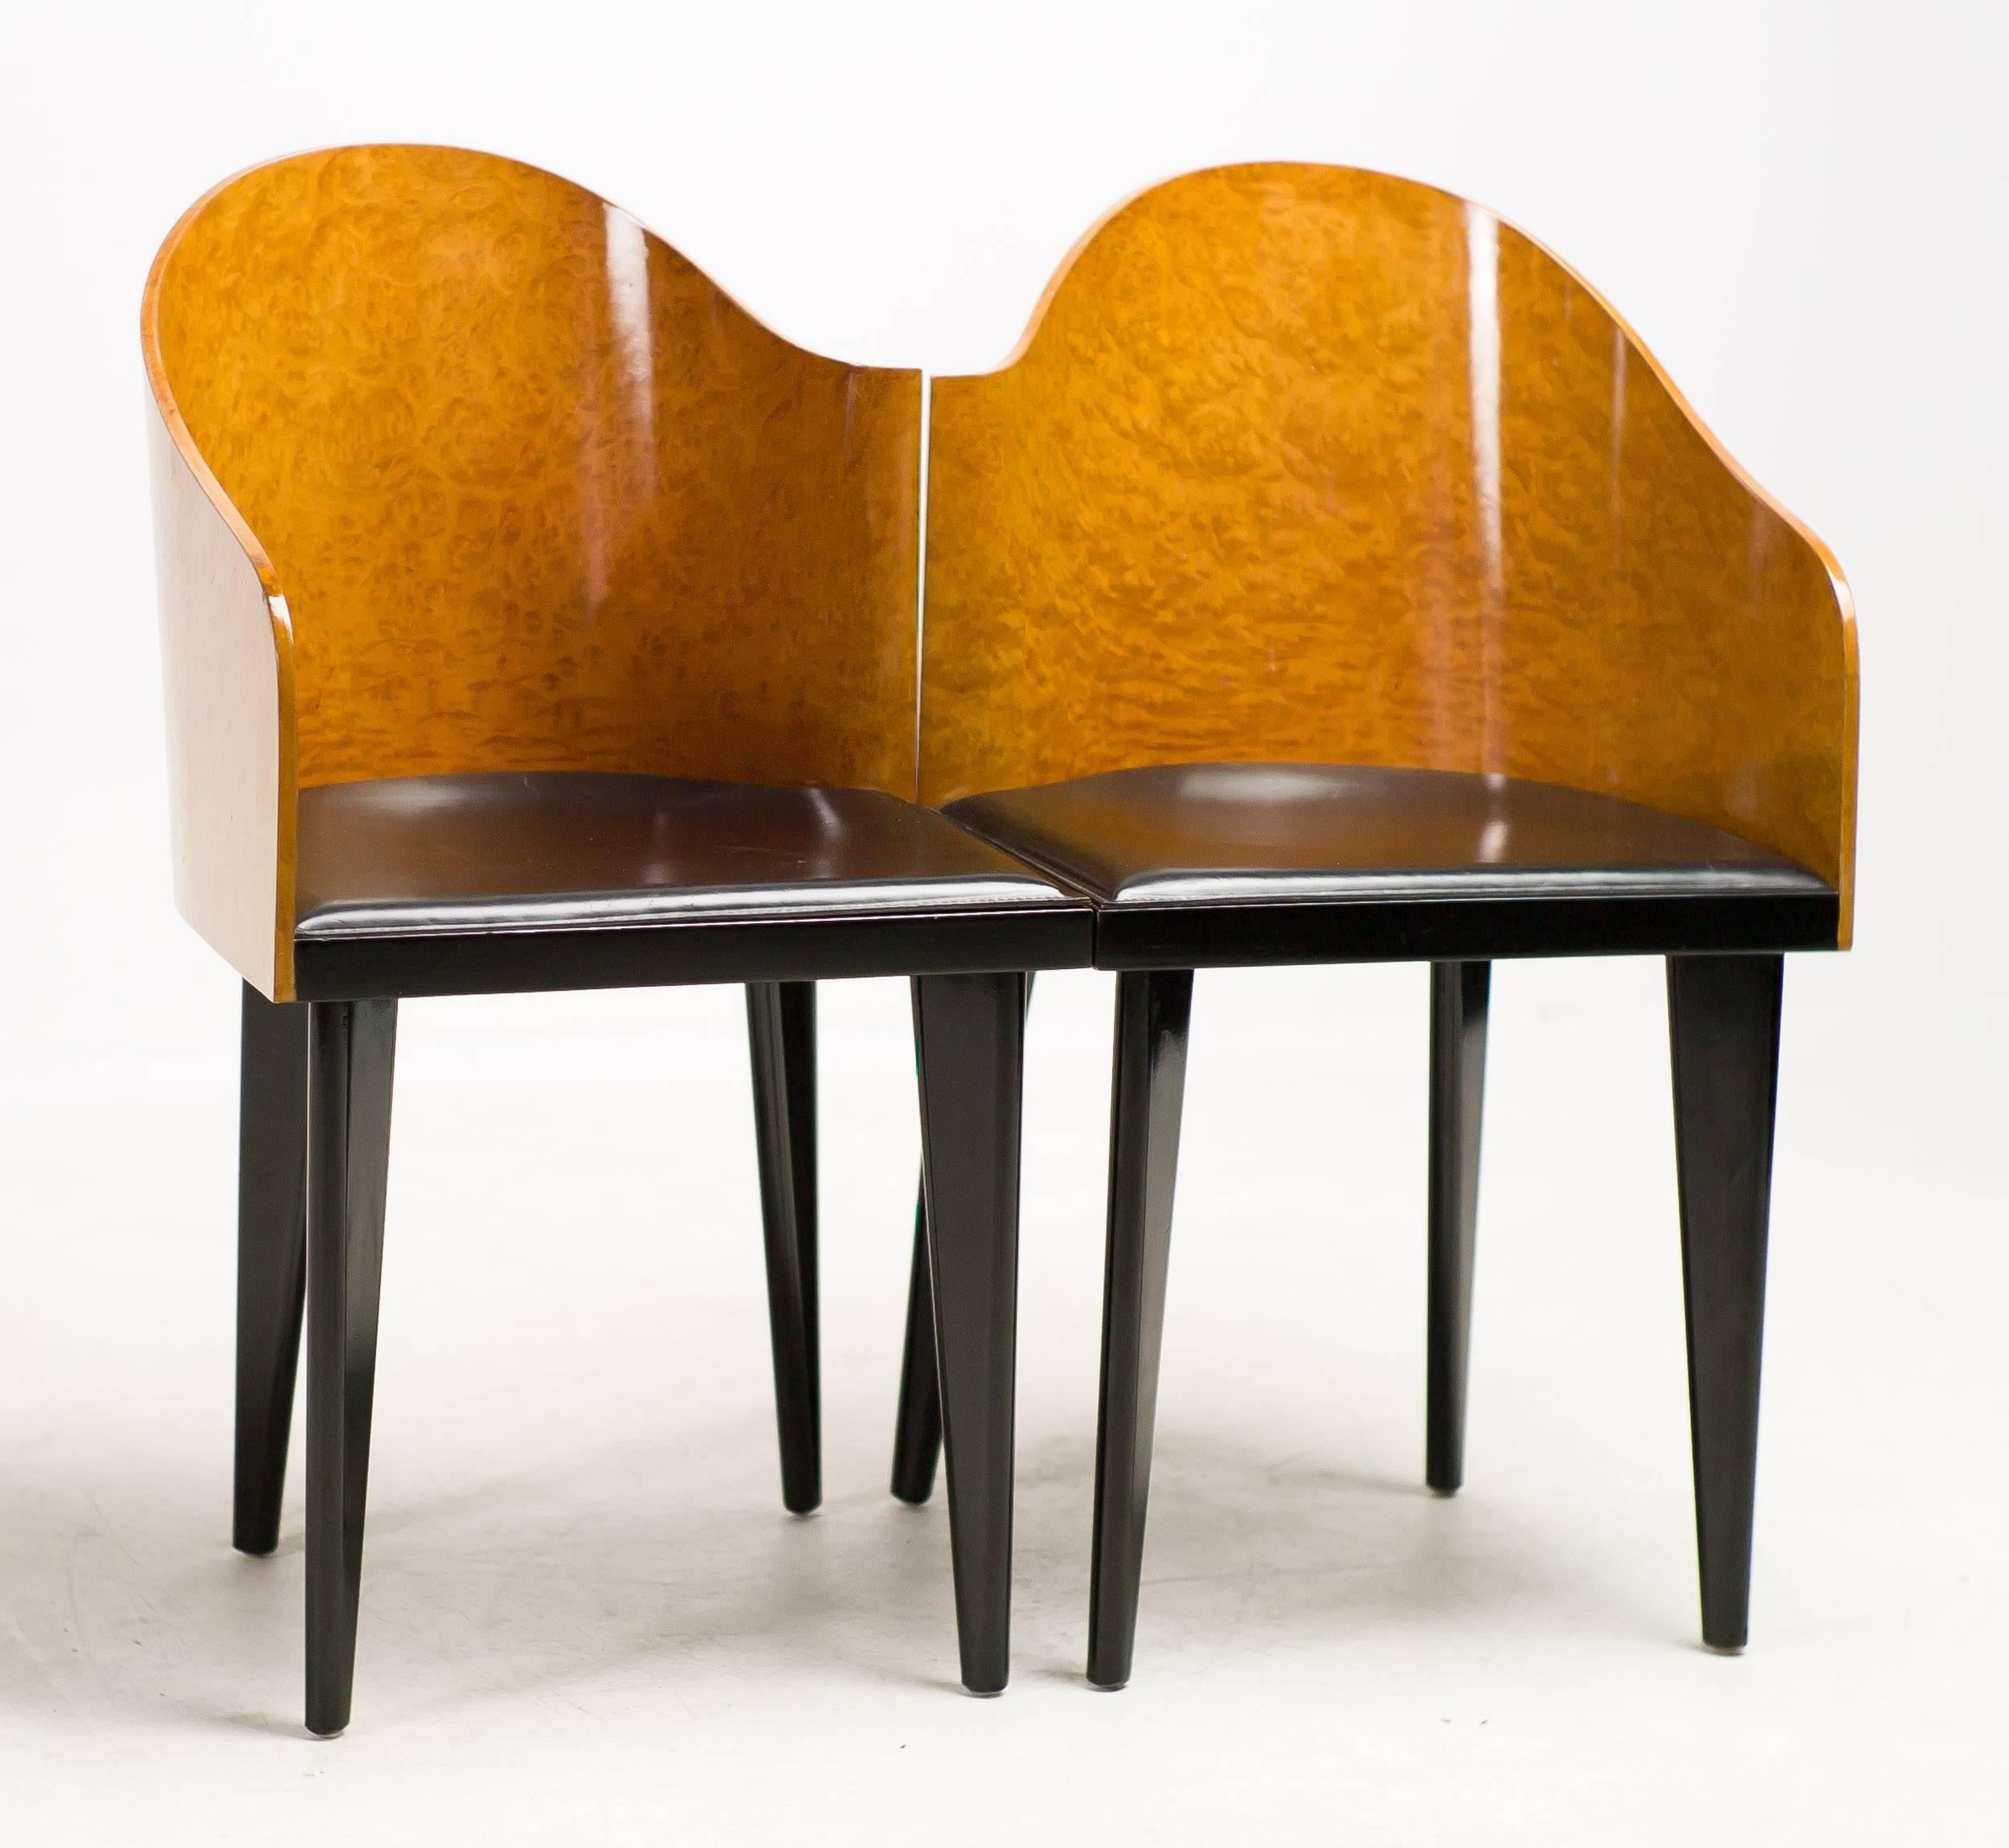 A wonderful pair of asymmetrical chairs by Saporiti.
Curved maple burl veneer back and black leather seat.
Toscana chairs designed in 1986 by Piero Sartogo.

Excellent fast and affordable worldwide shipping.
White glove delivery available upon